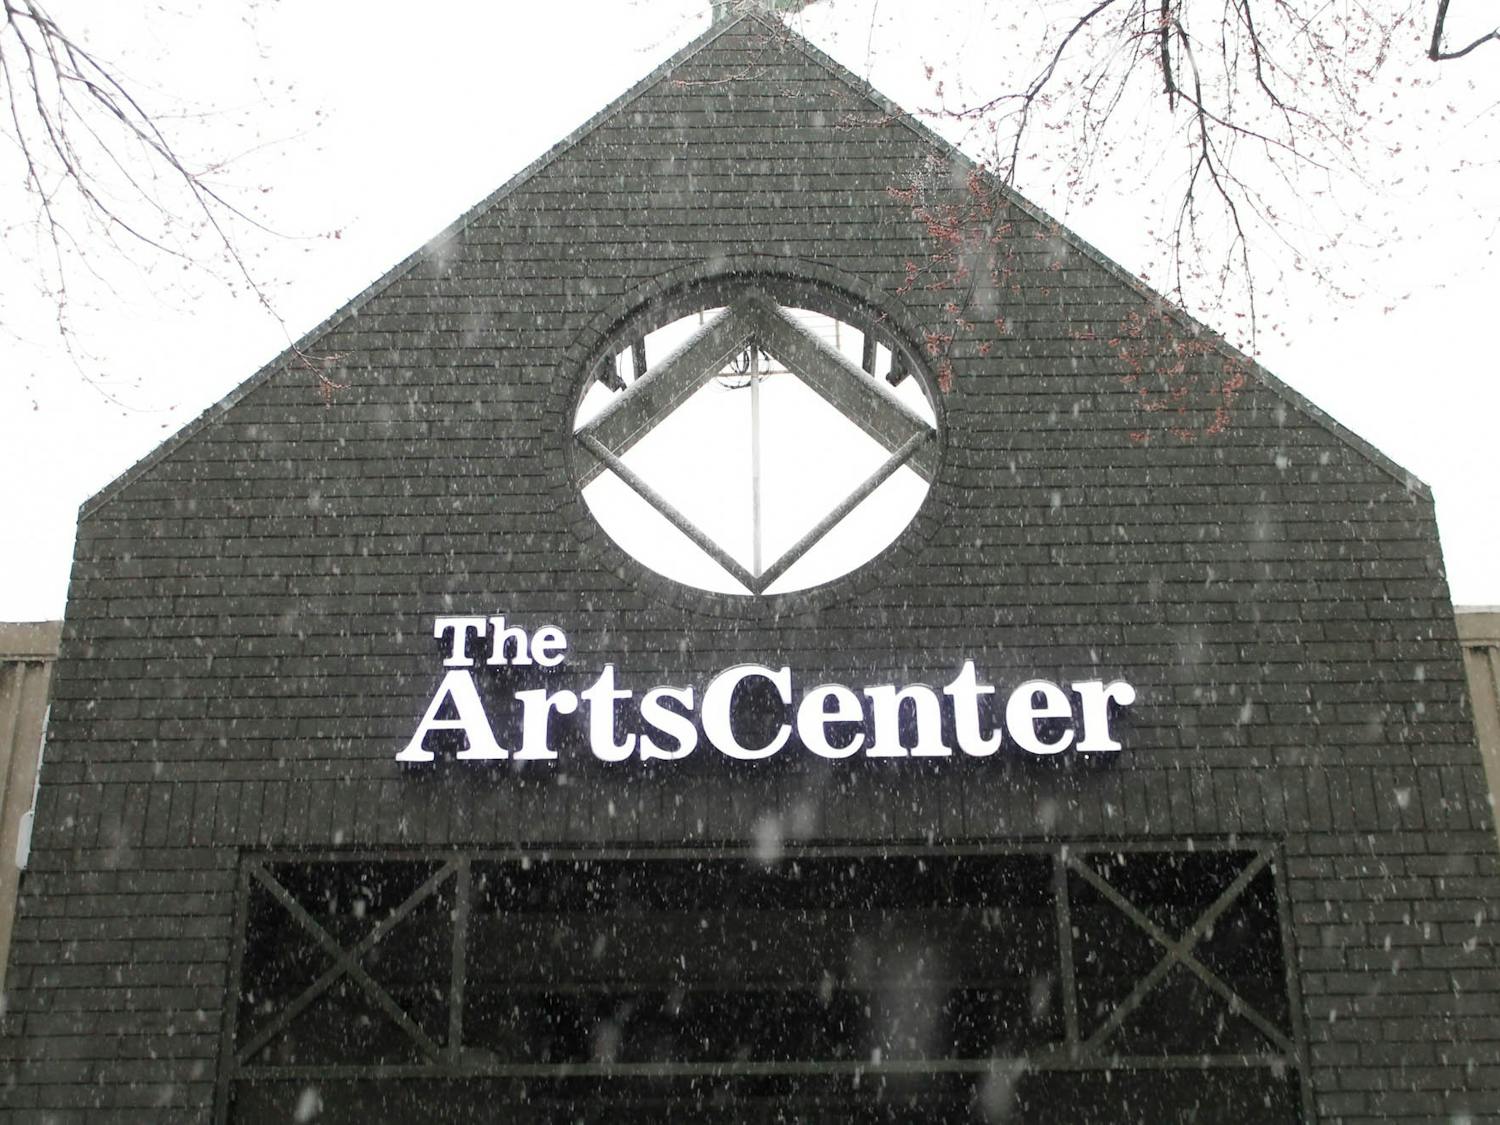 The ArtsCenter located at 300 E Main Street in Carrboro, pictured on Feb. 20, 2020. The Pauper Players will be hosting performances at the ArtsCenter from Feb. 20-23, 2020.